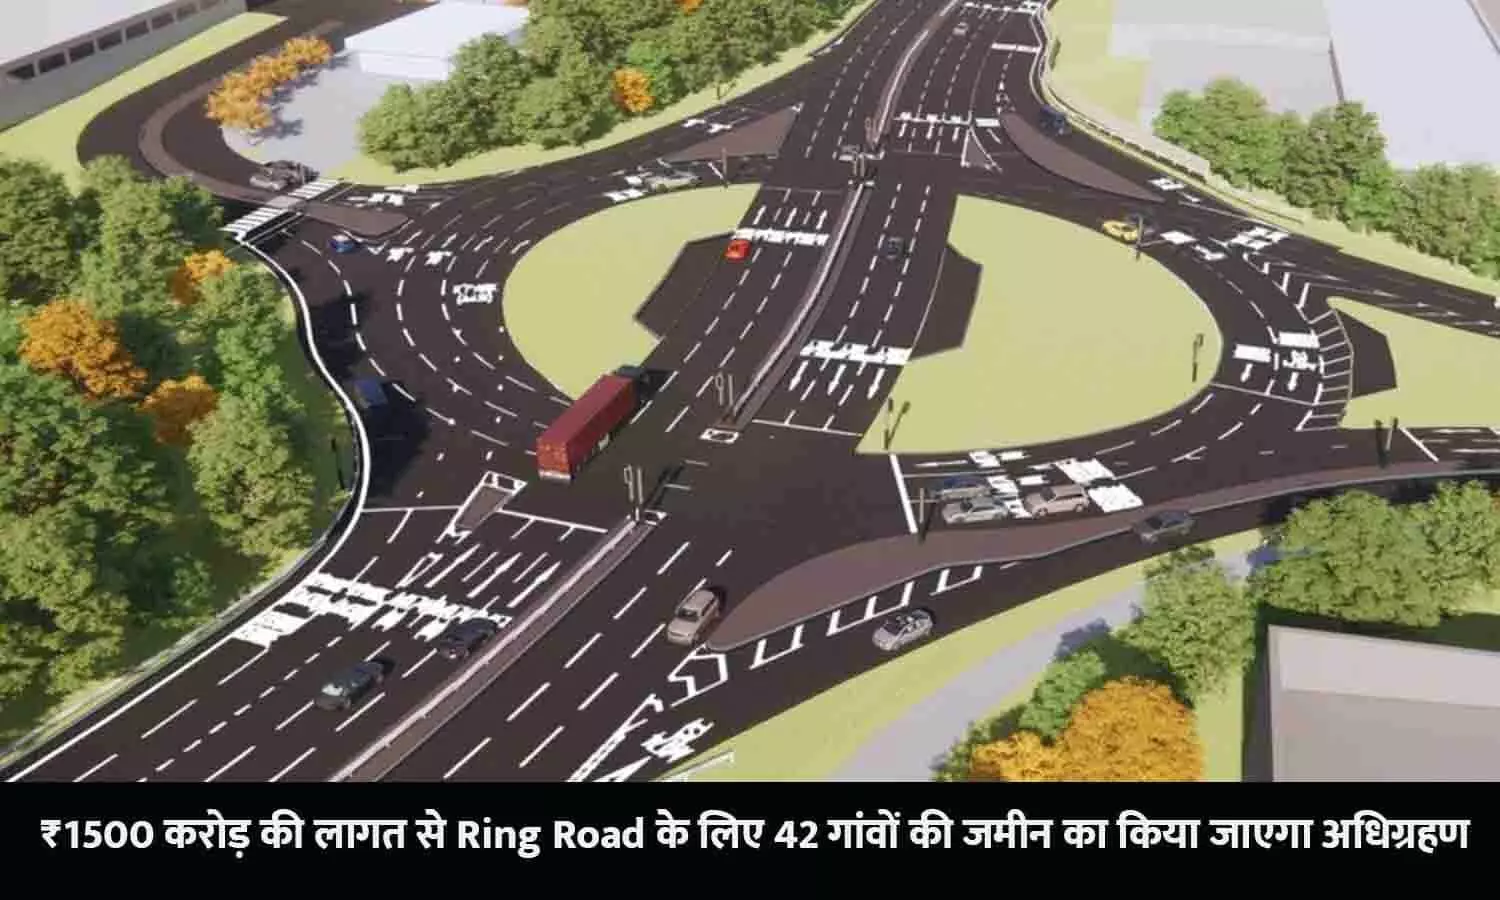 Patna ring road latest update | starting point se update | ring road |  @localinfobyts - YouTube